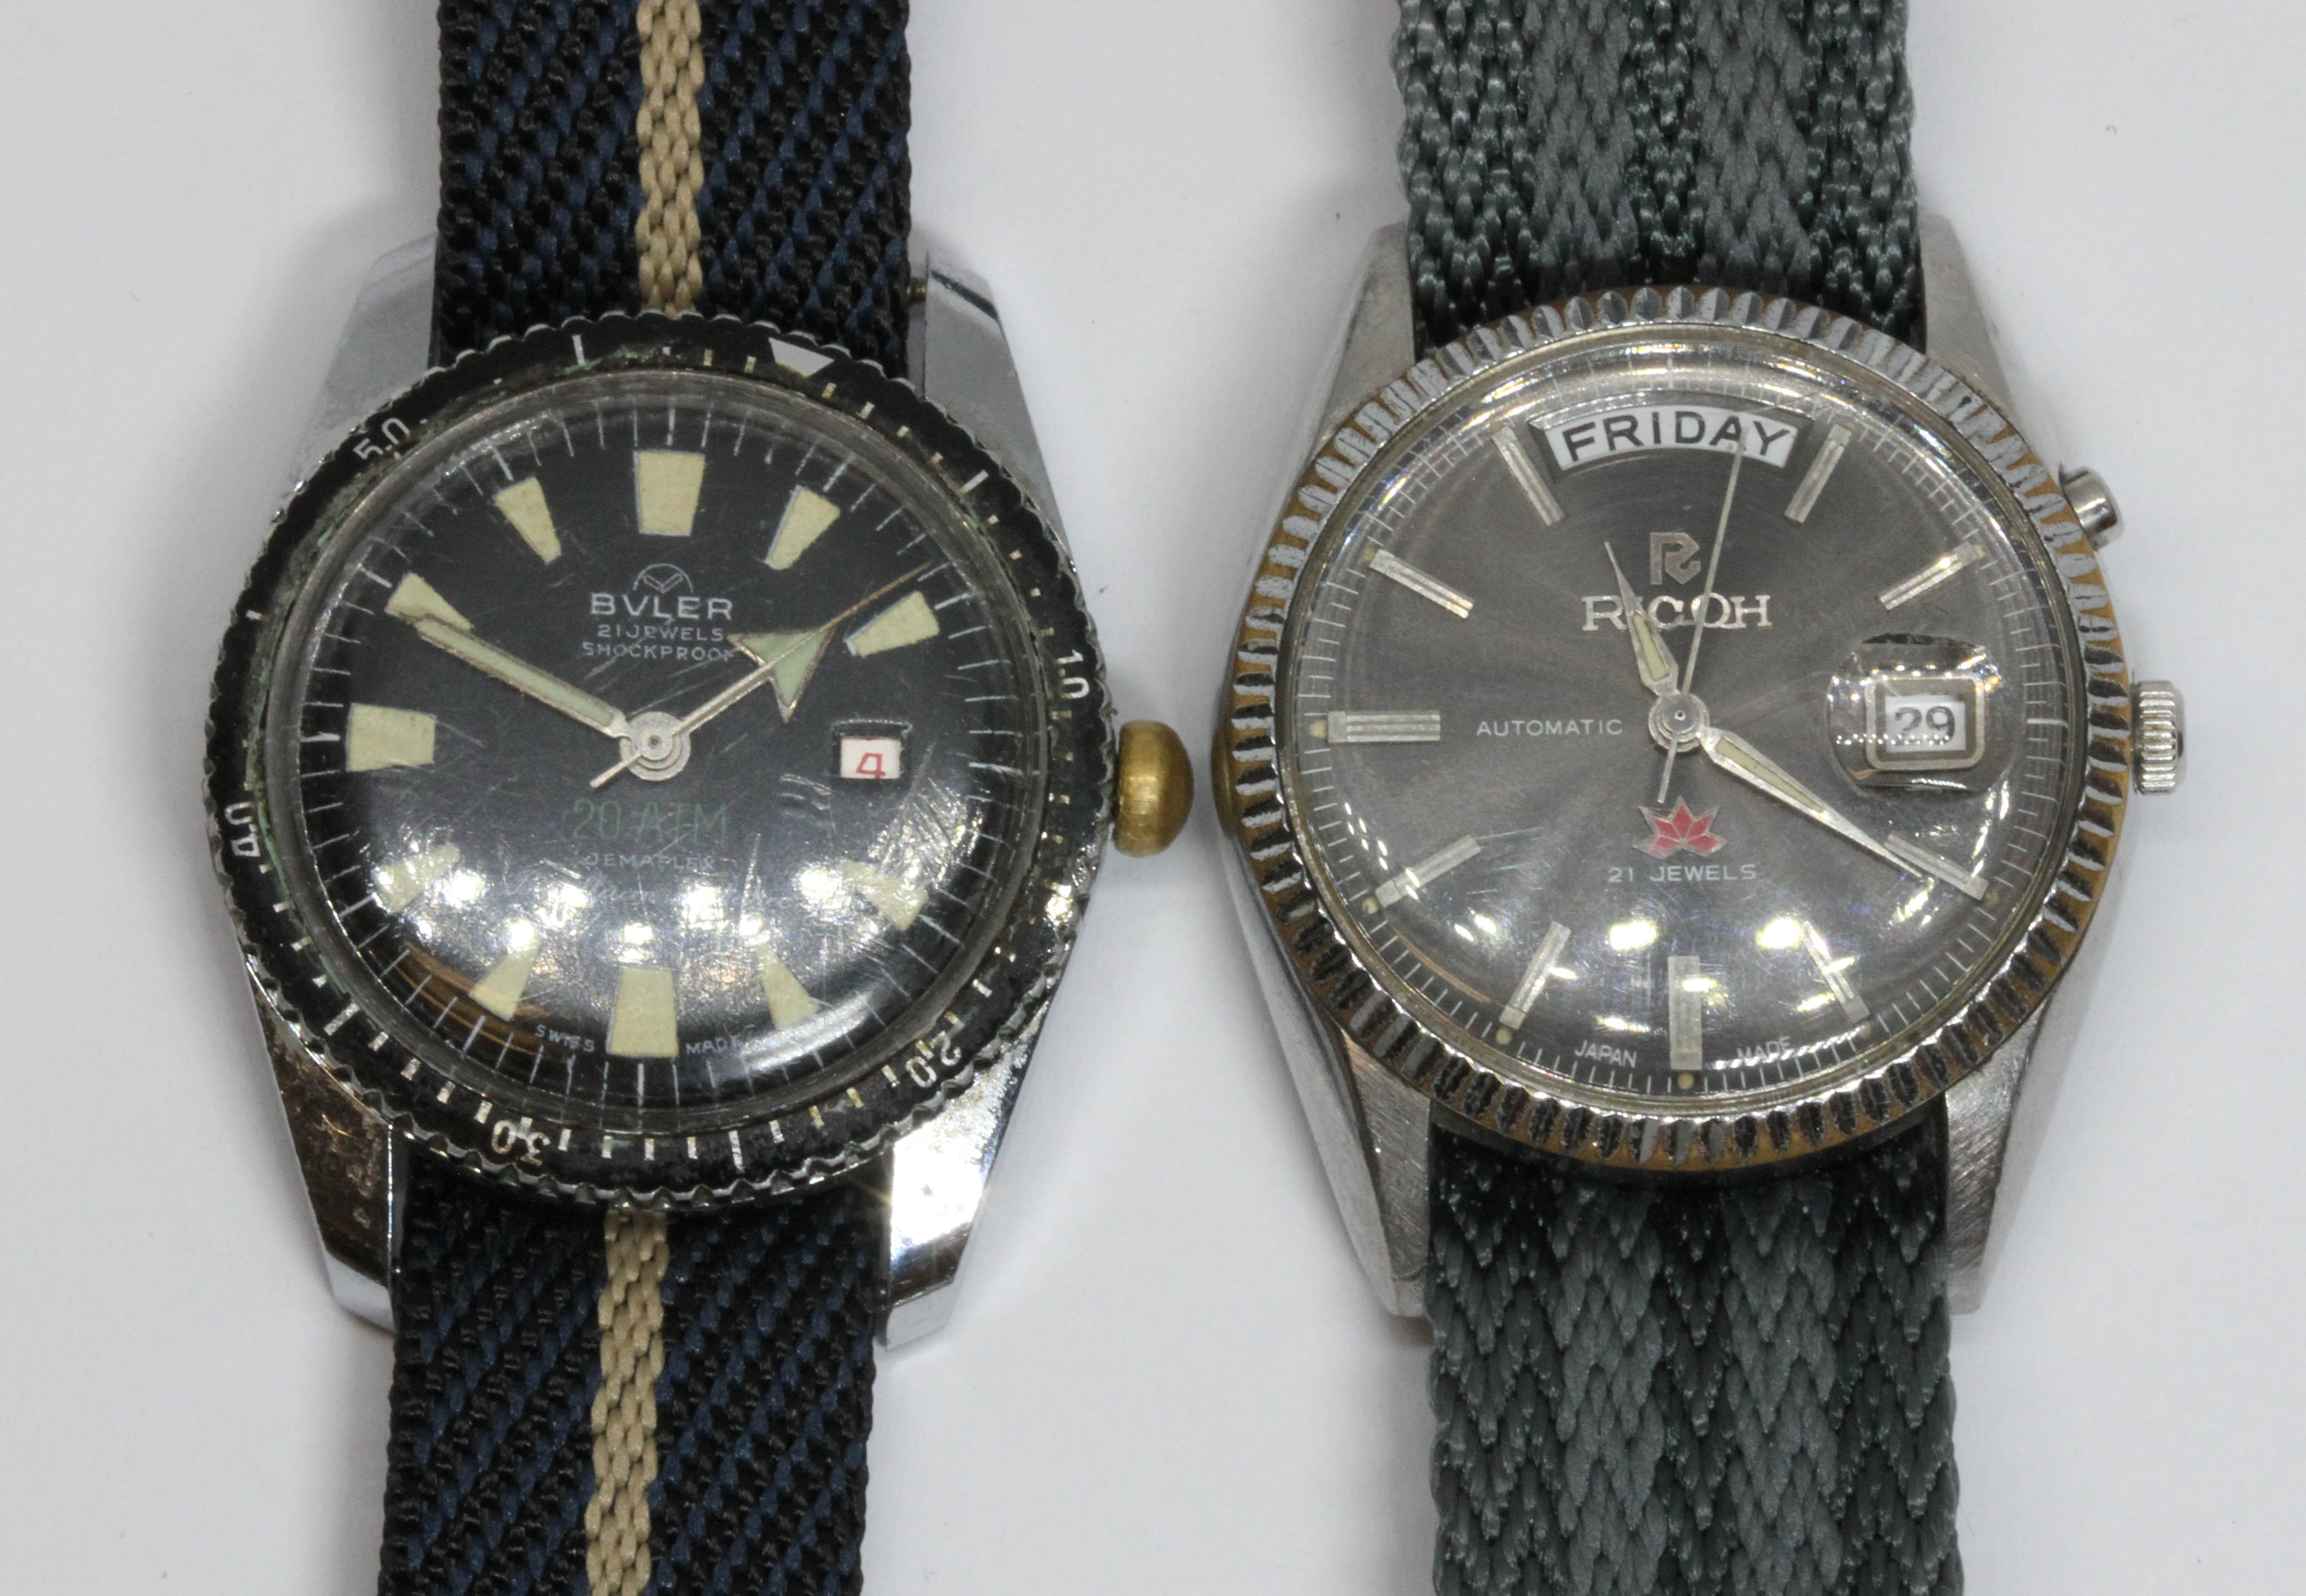 Two vintage wristwatches: Buler 21 jewel manual and a Ricoh automatic. Condition - both appear to